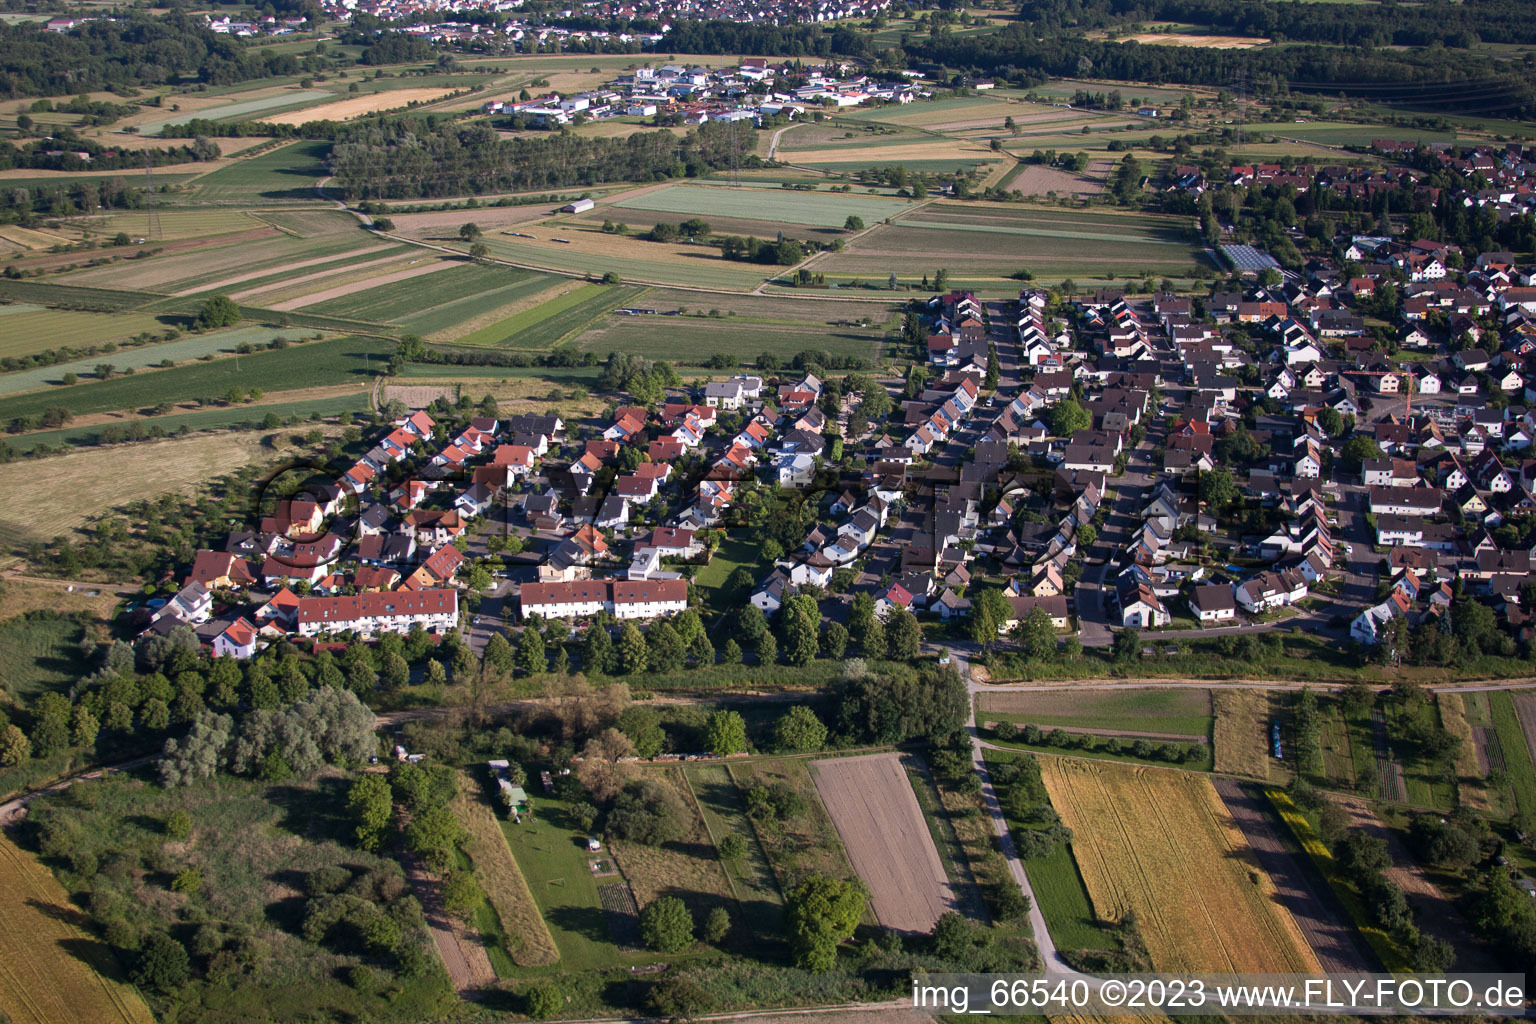 Au am Rhein in the state Baden-Wuerttemberg, Germany from the drone perspective